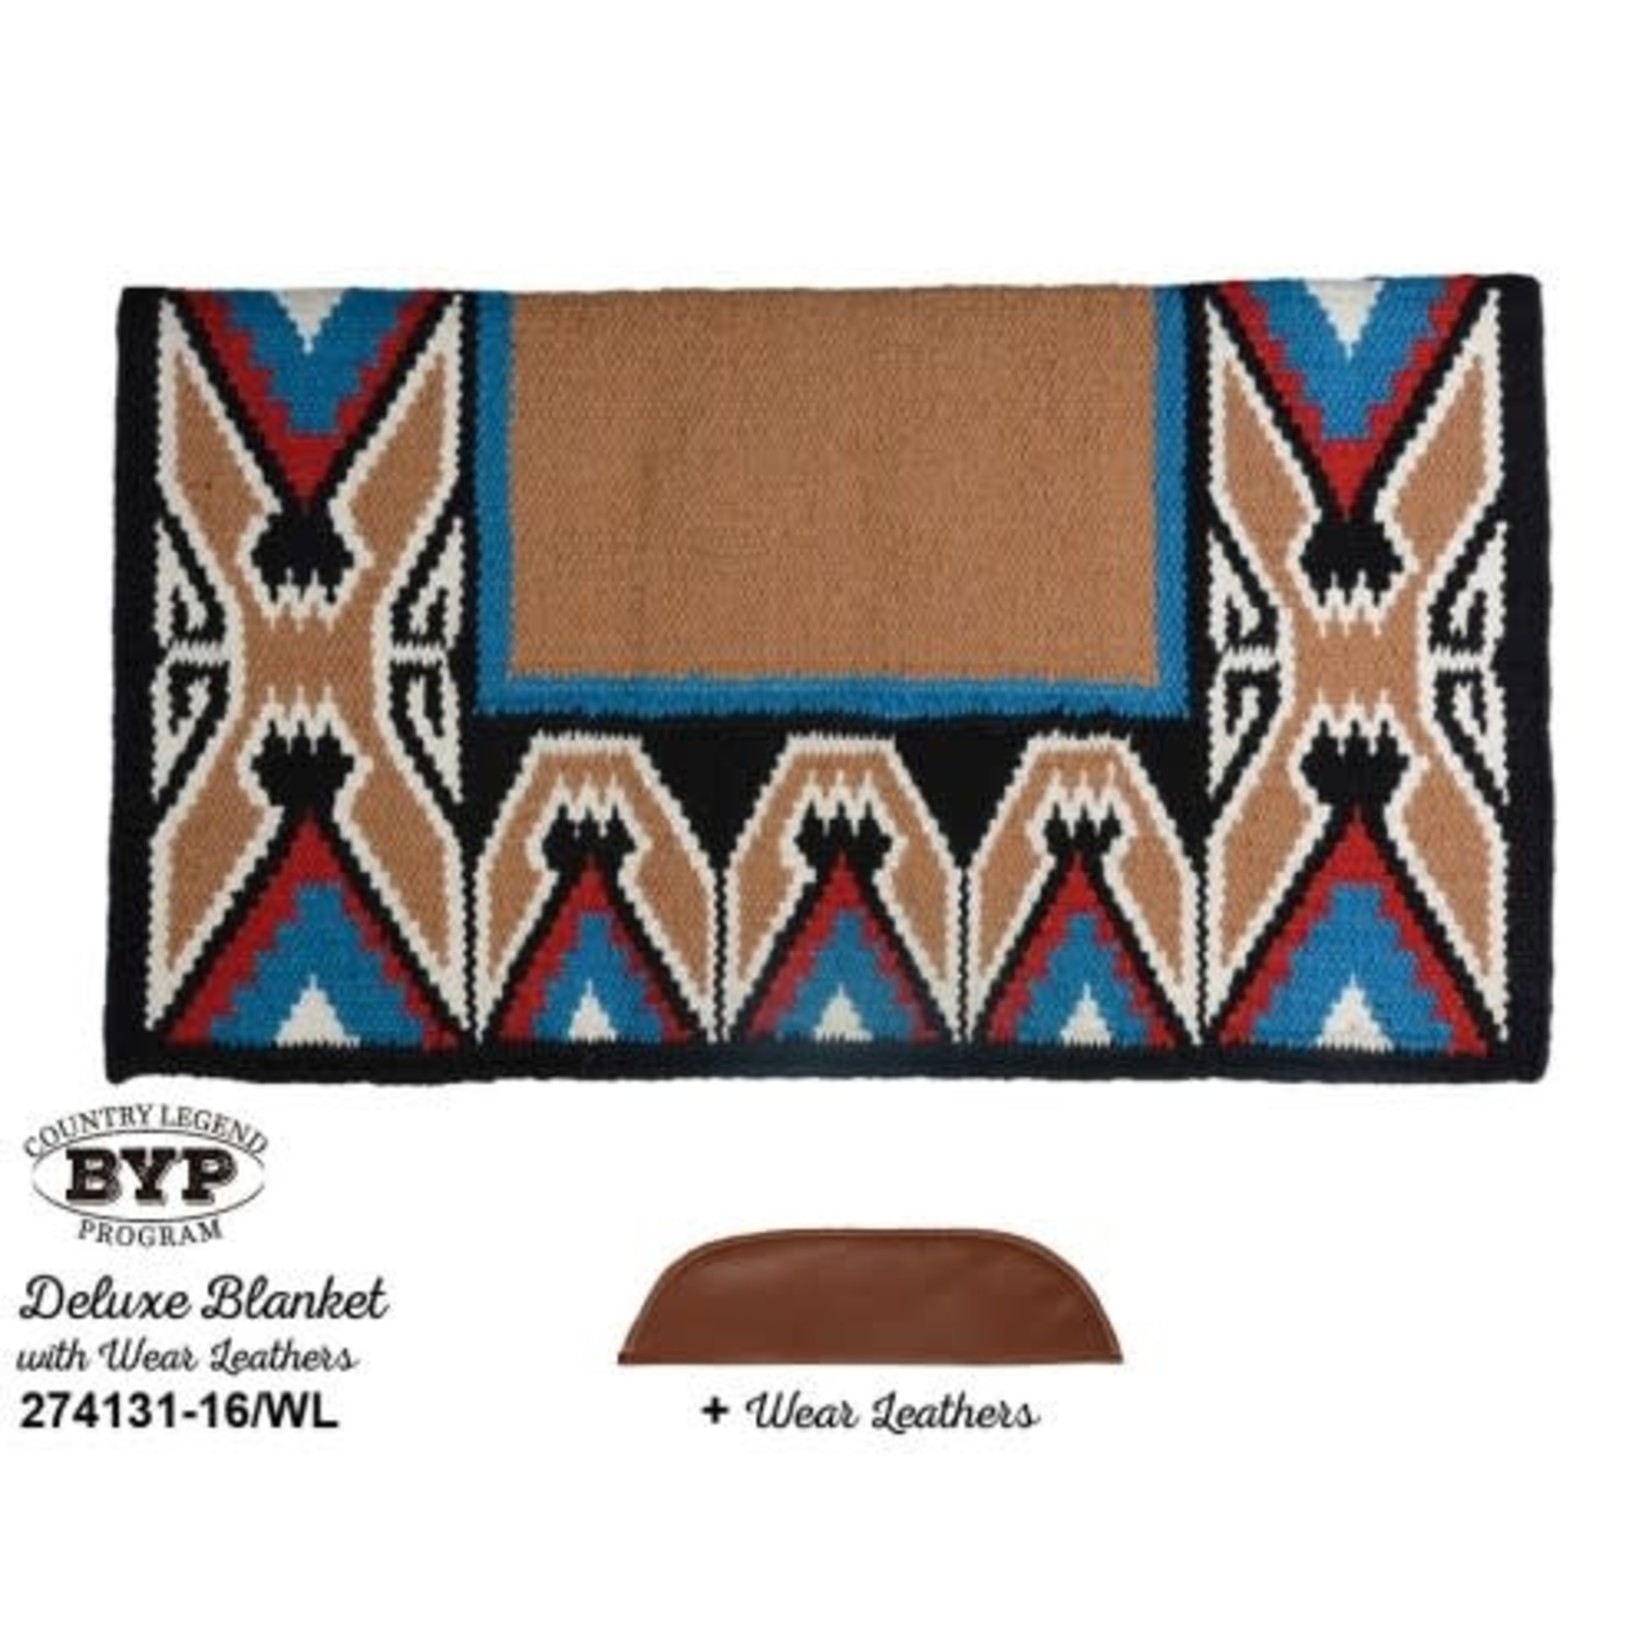 Country Legends Teepee Saddle Blanket 100% Wool